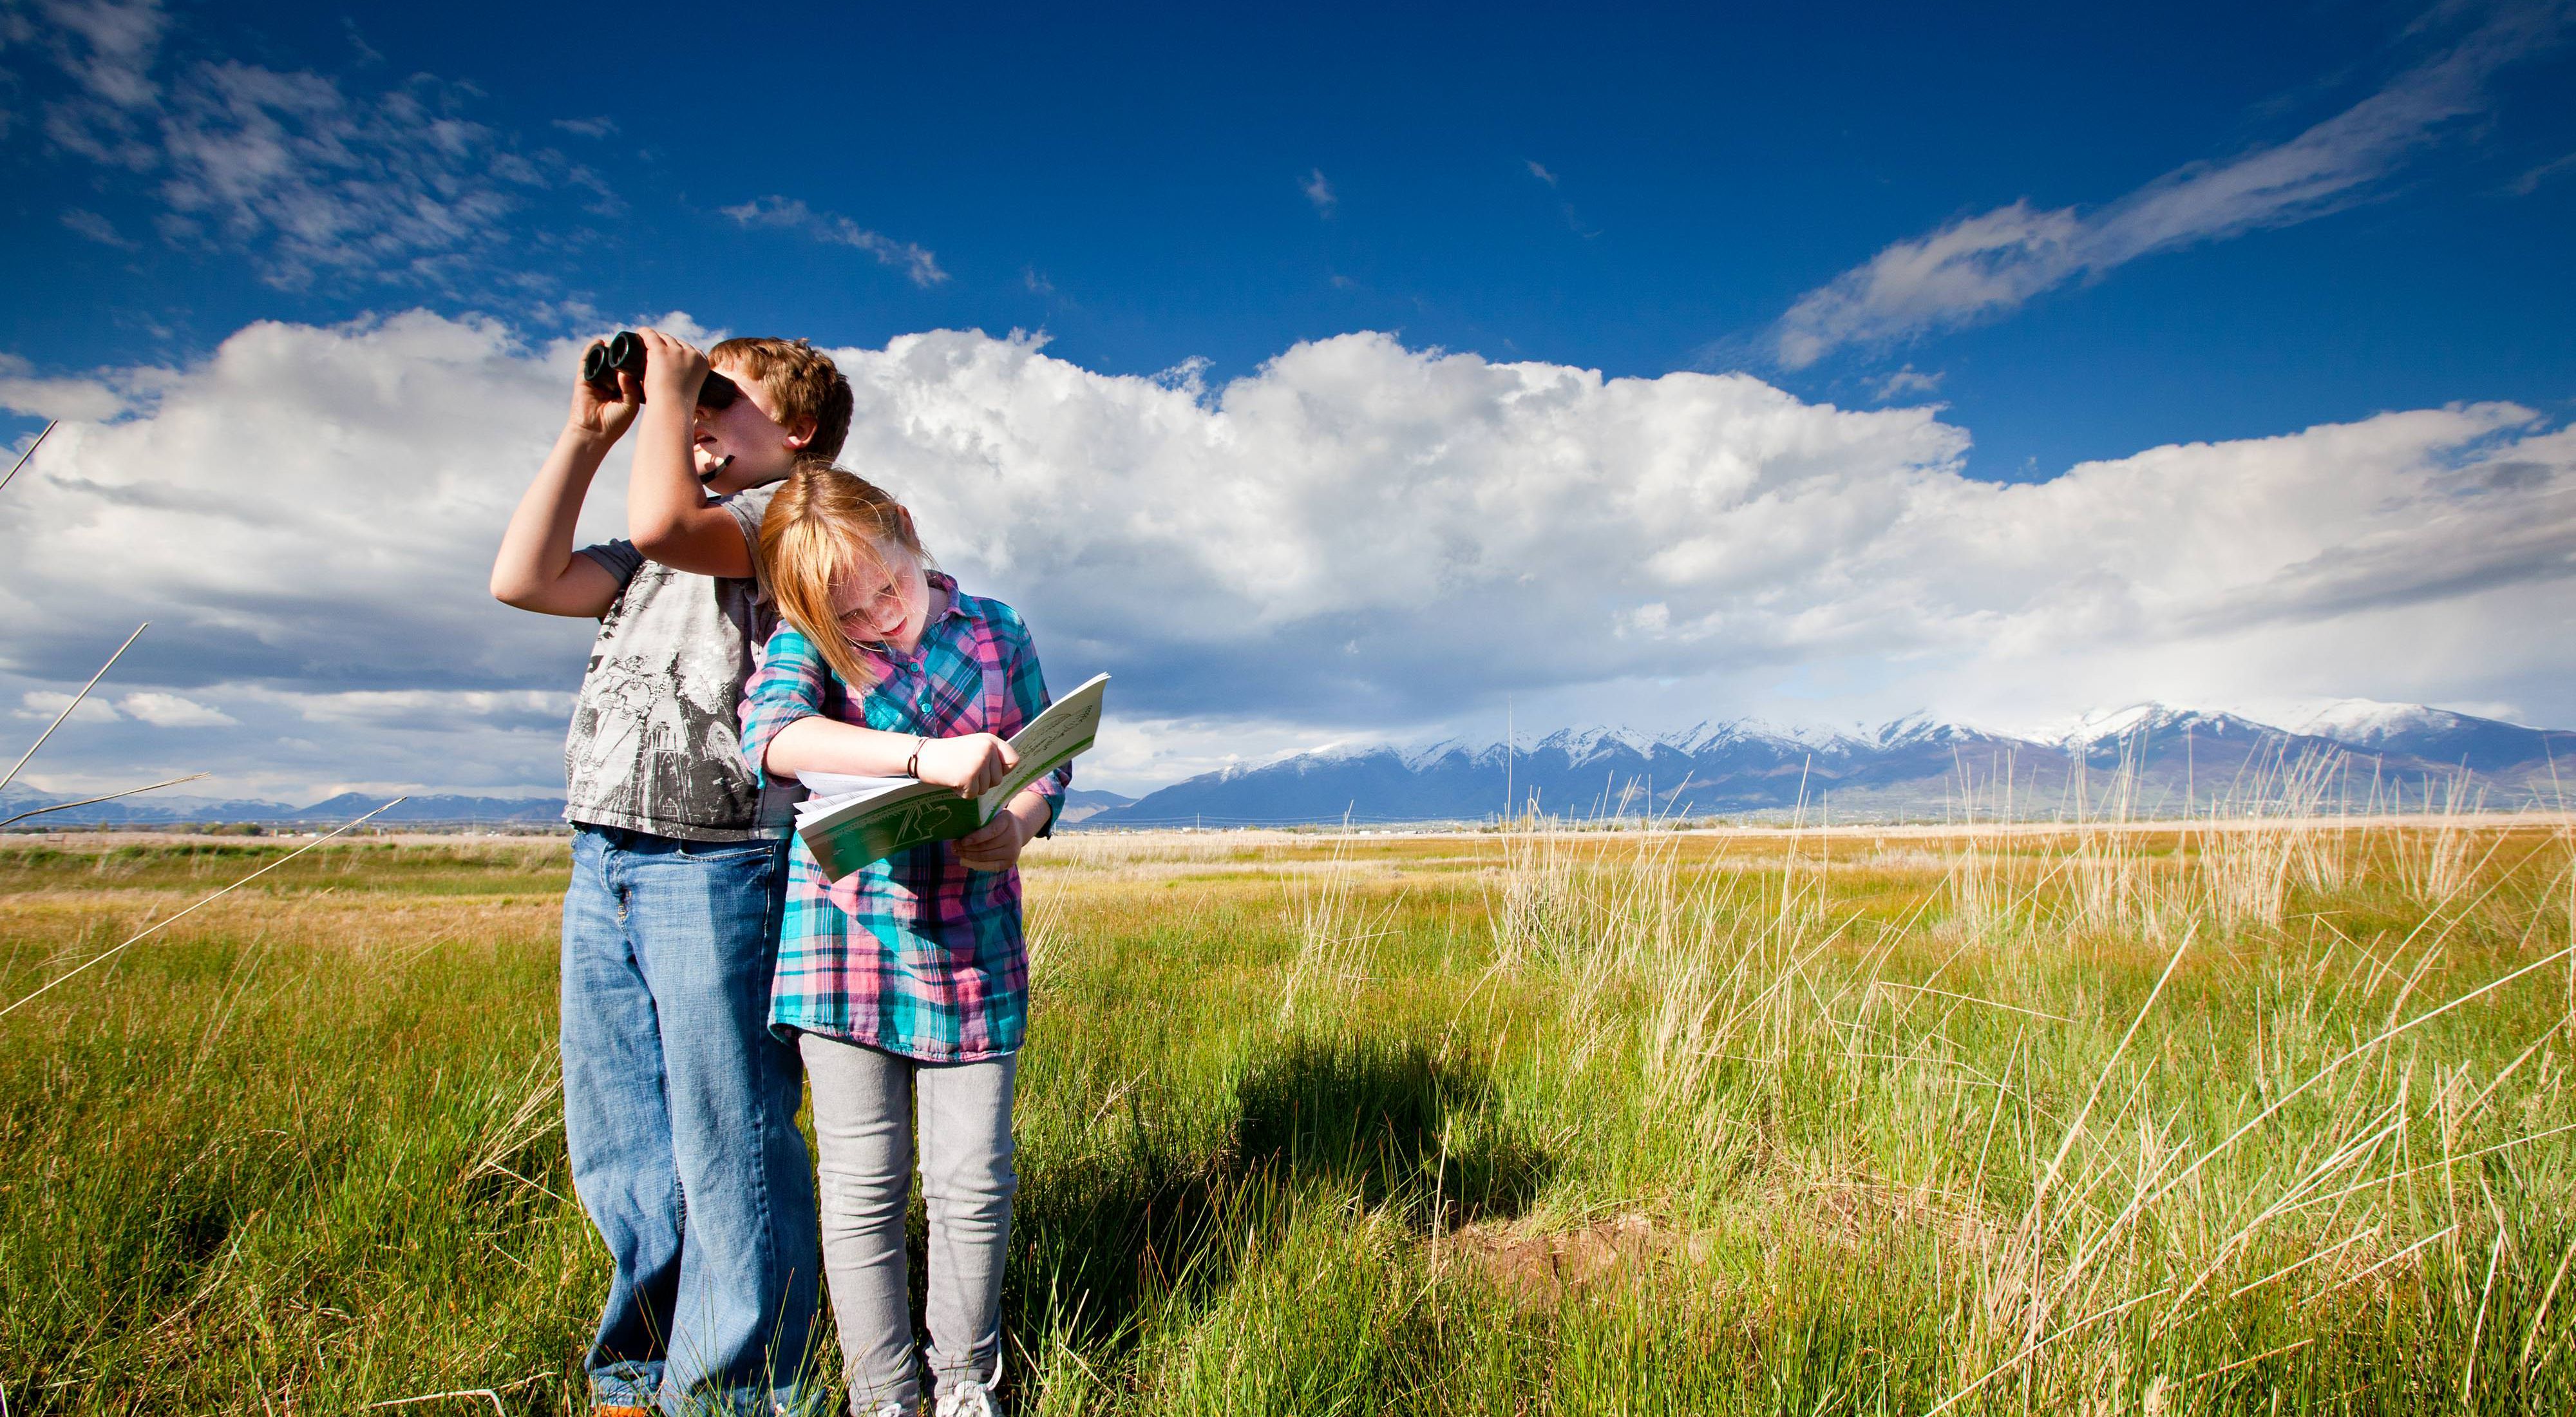 Two children stand in a grassy field with a snowy mountain range in the background. One child looks through binoculars and the other looks in a book.